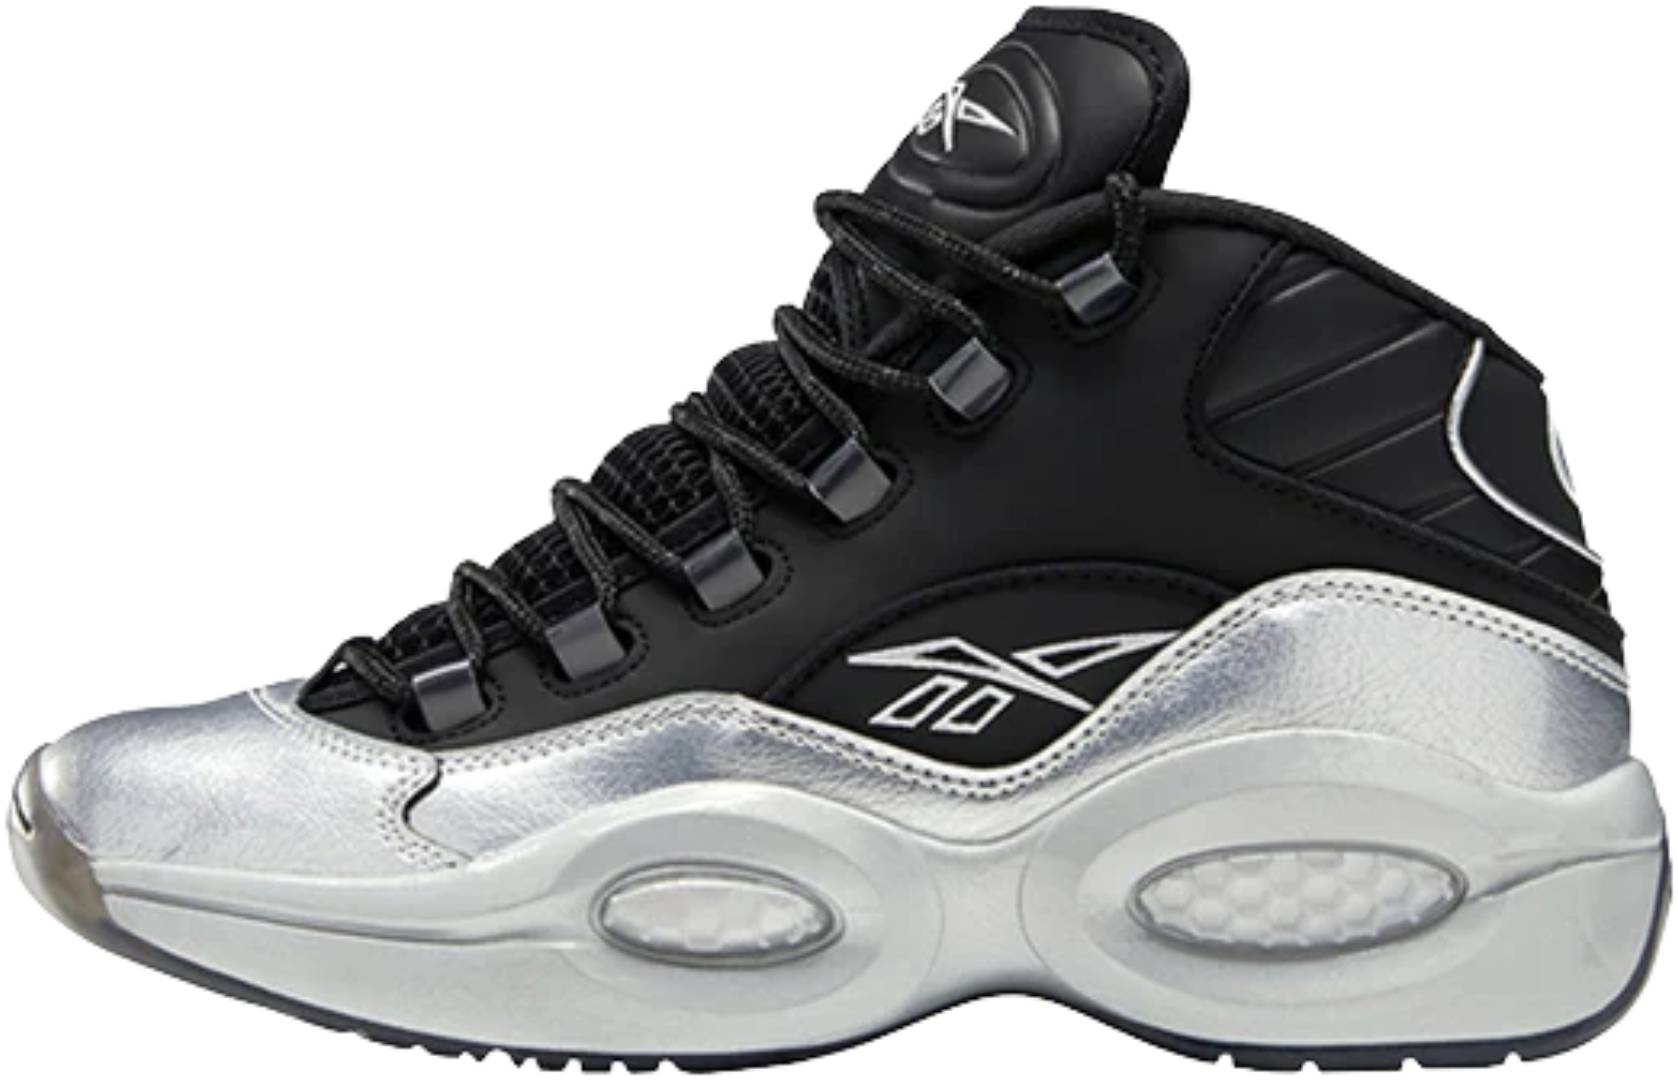 10+ basketball shoes: Save up 51% |